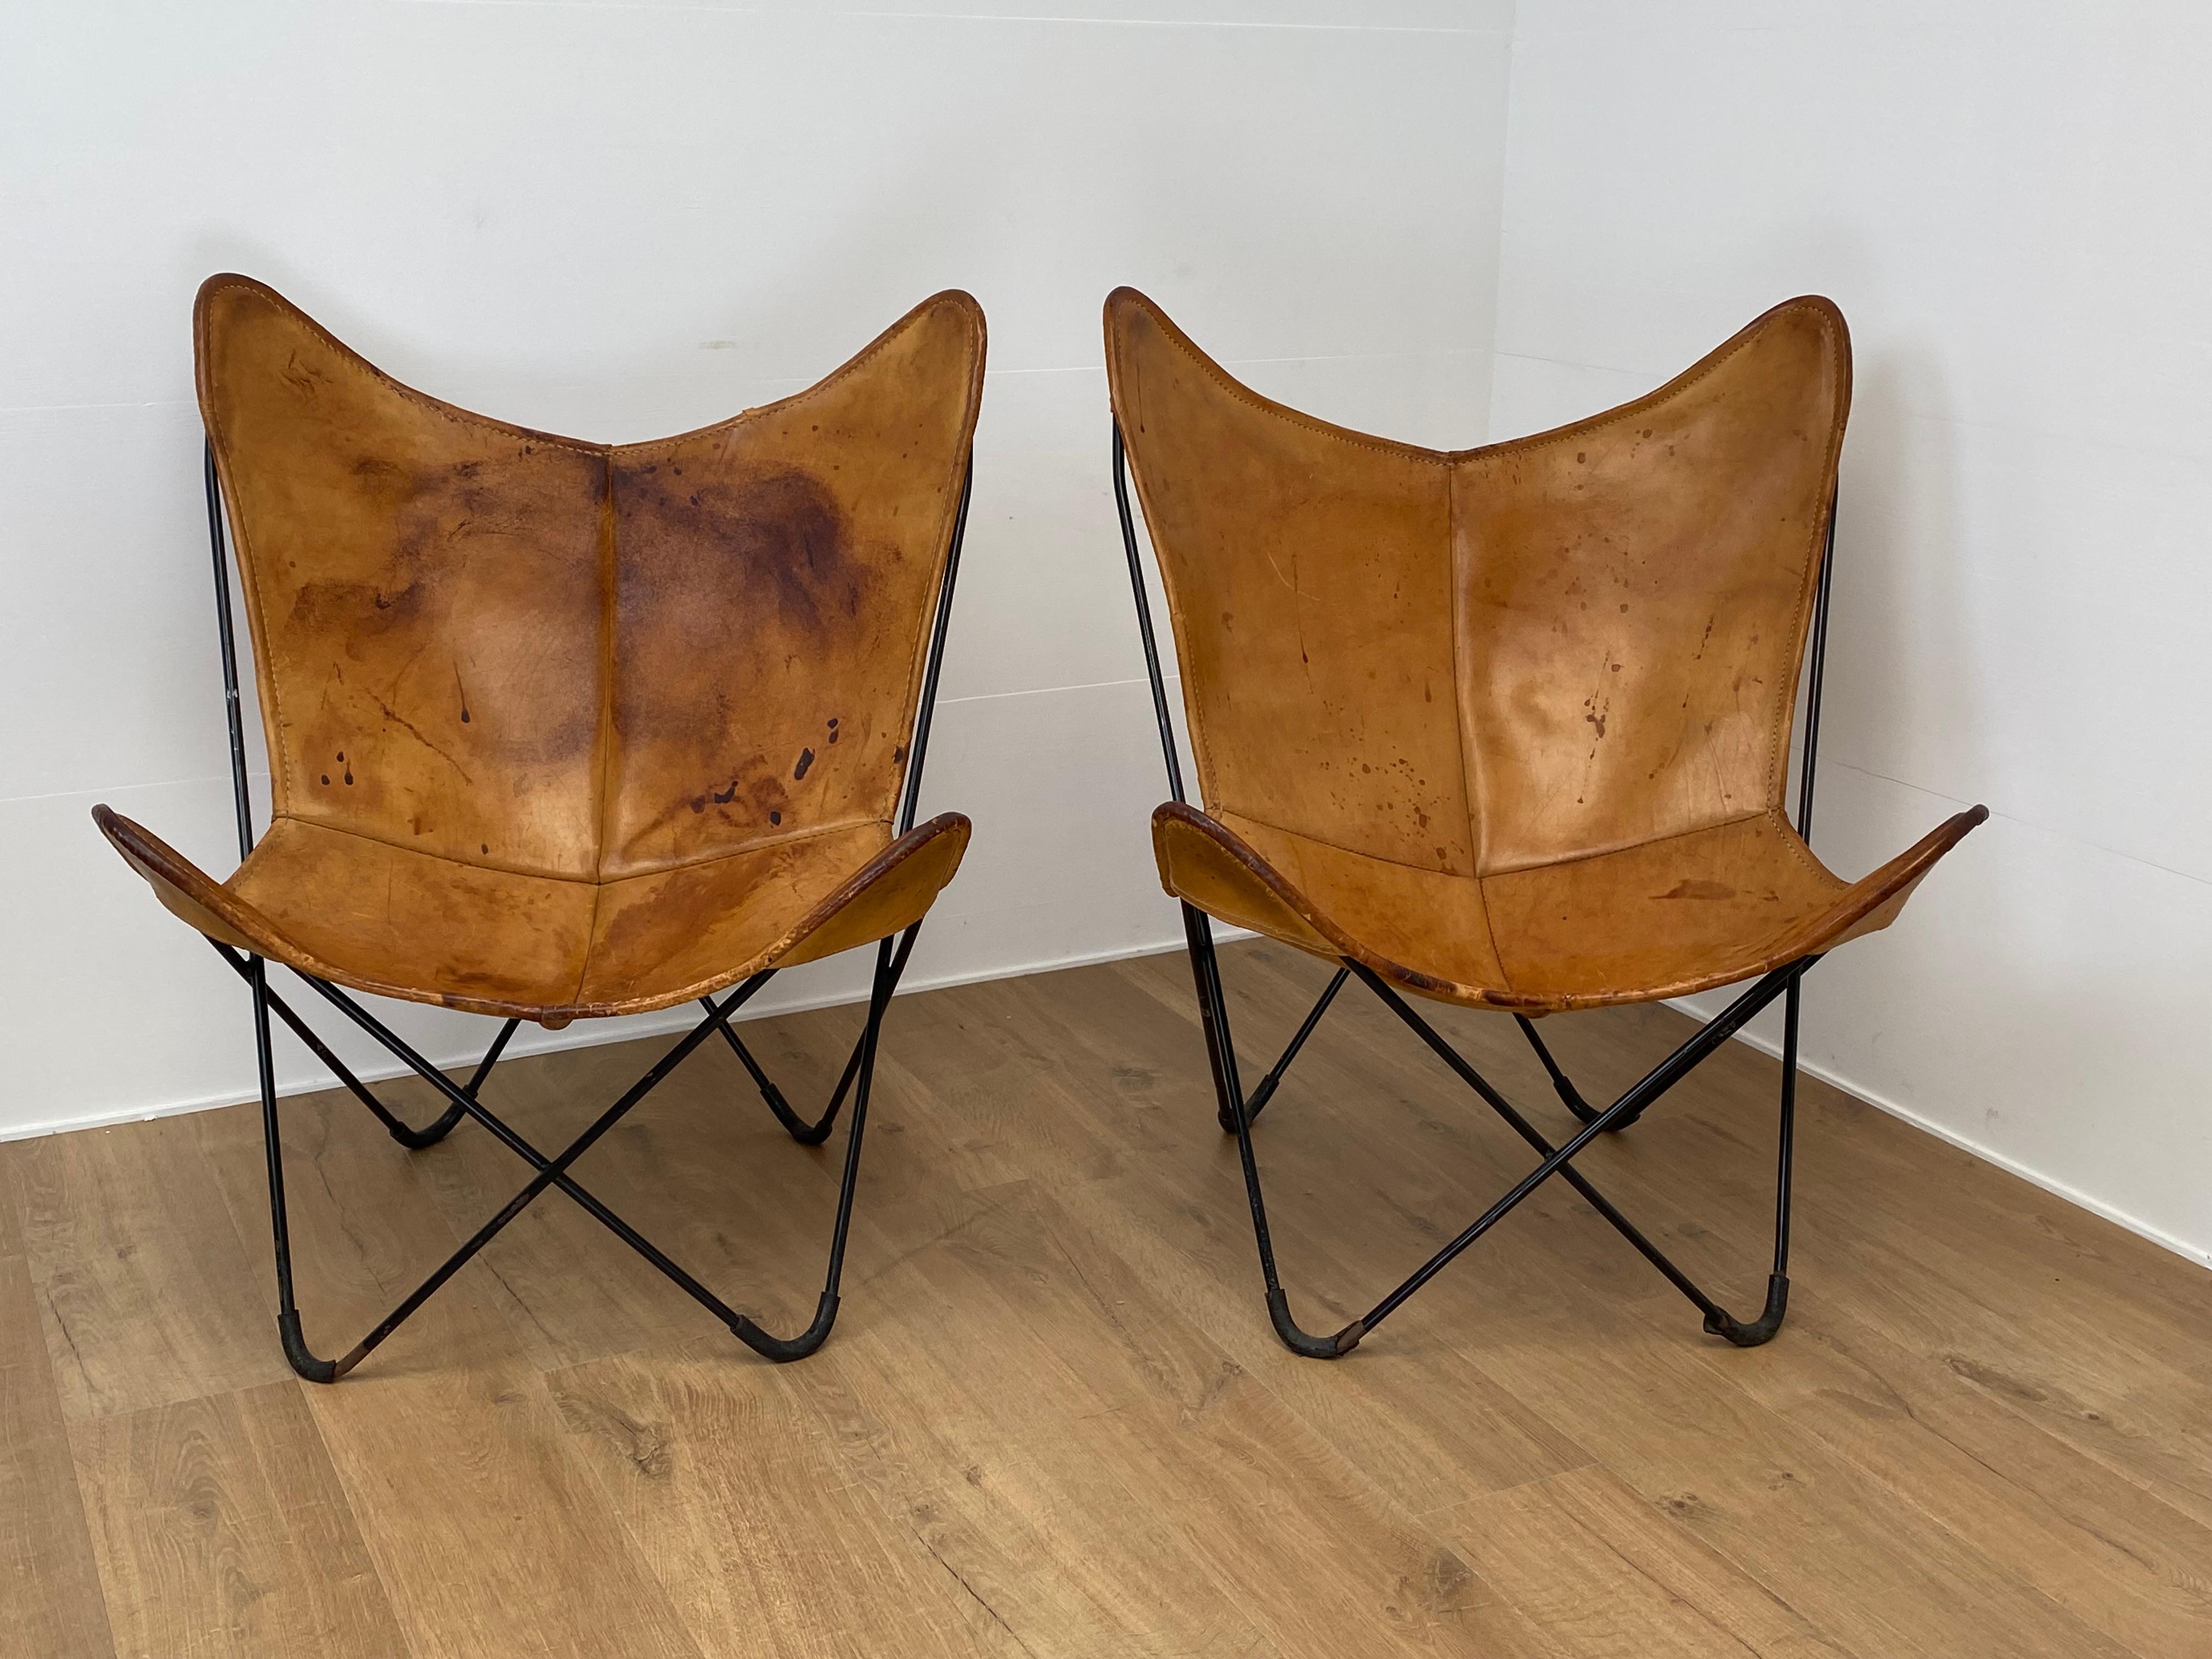 Exceptional Pair of Leather Butterfly Chairs,BKF Chairs for Knoll,
designed by Bonet,Kurchan and Ferrari in Buenos Aires in 1938,
the pair of Chairs have a beautiful Cognac Color and a great patina,
age related stains,scrathes and wear of the